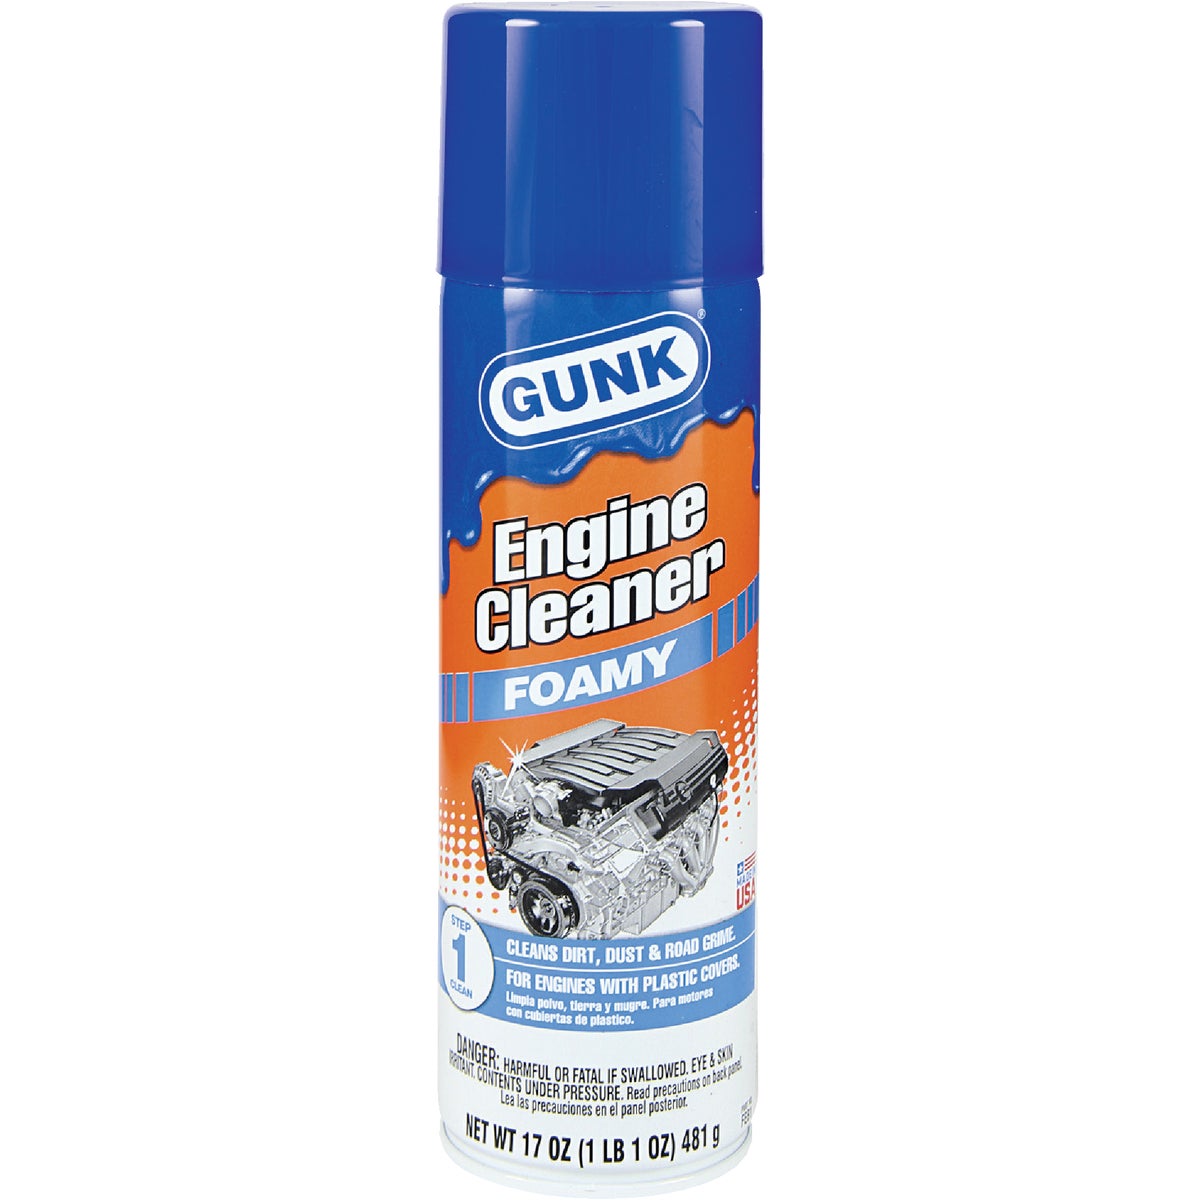 Item 580357, Foamy Engine Cleaner clings to vertical surfaces long enough to effect 